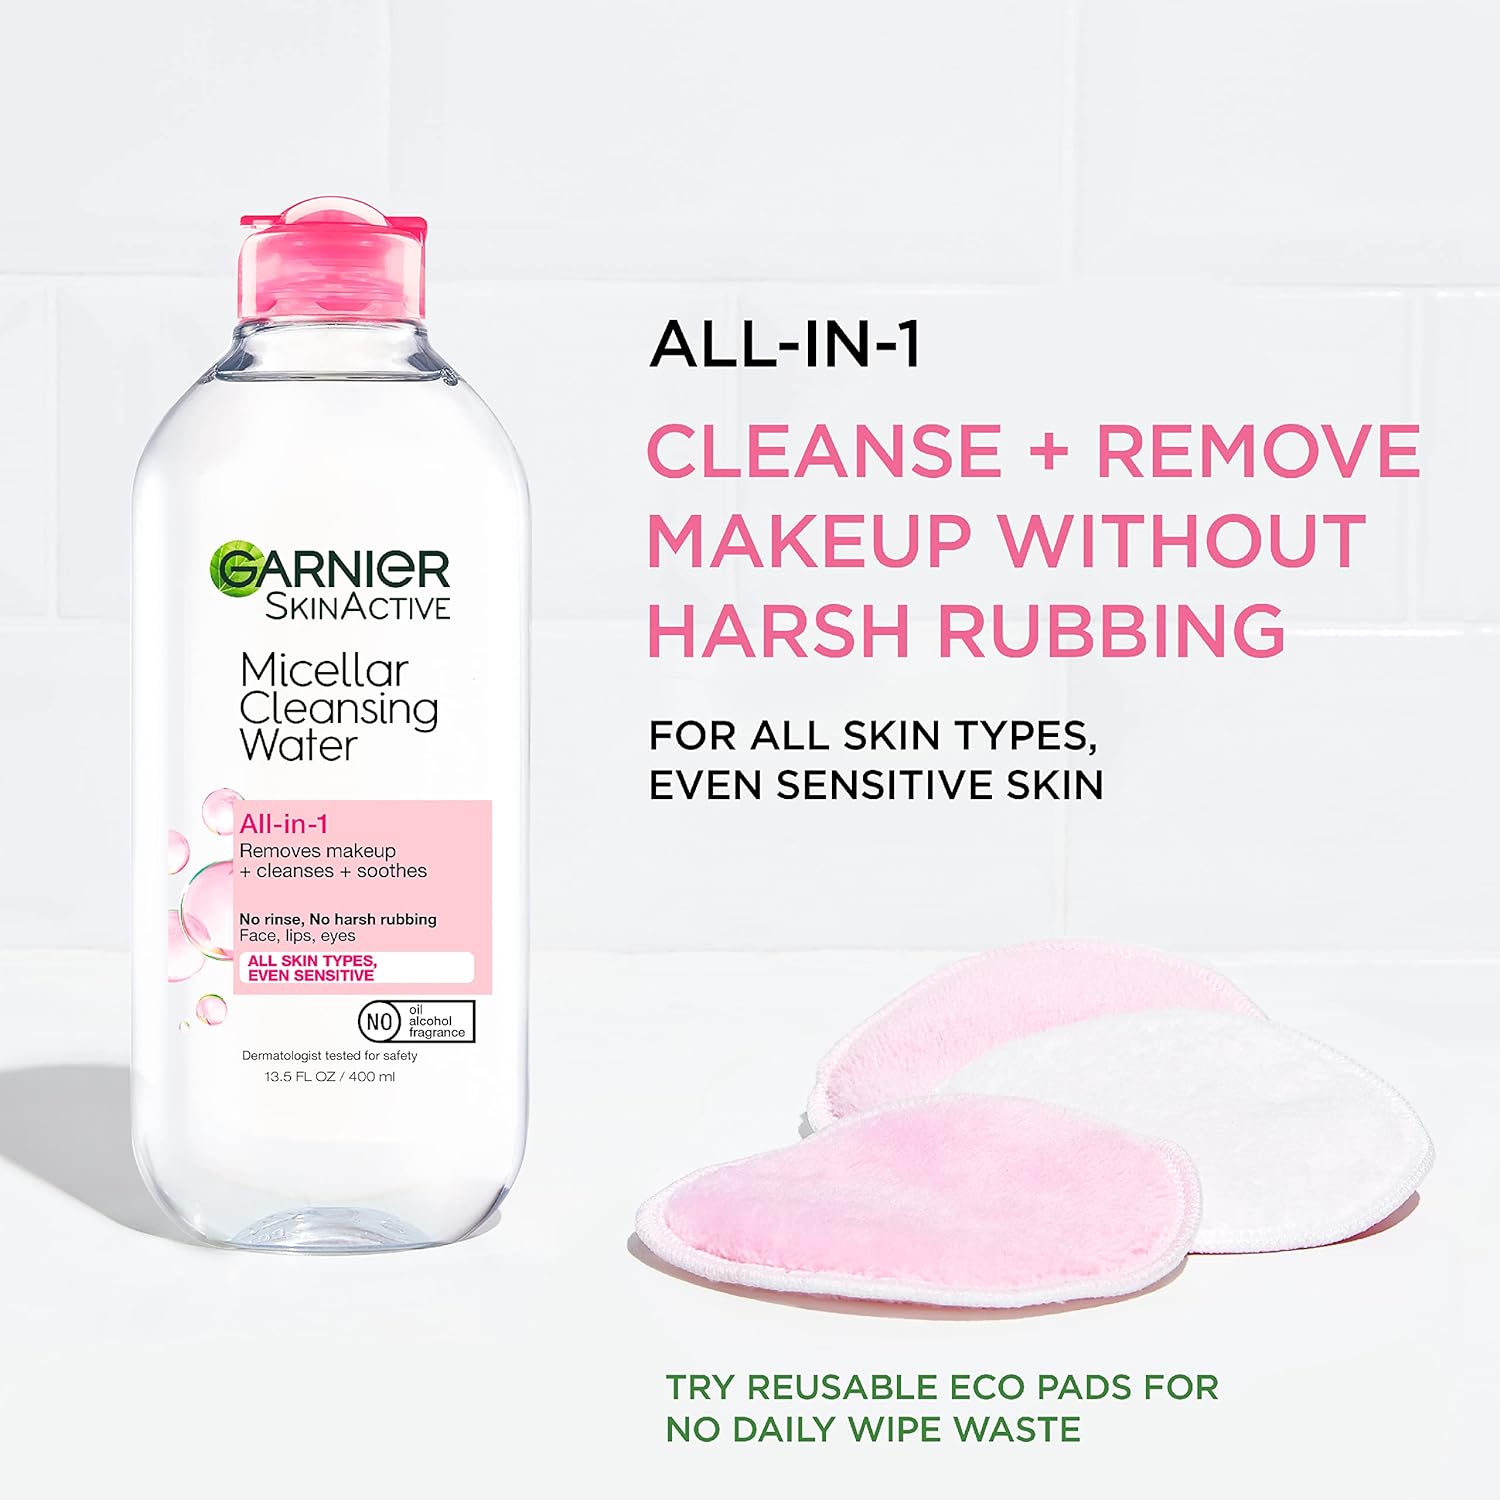 Maybelline The Falsies Lash Lift Washable Mascara + Garnier SkinActive Micellar Water Bundle, Includes 1 Mascara in Very Black and 1 Makeup Remover : Beauty & Personal Care